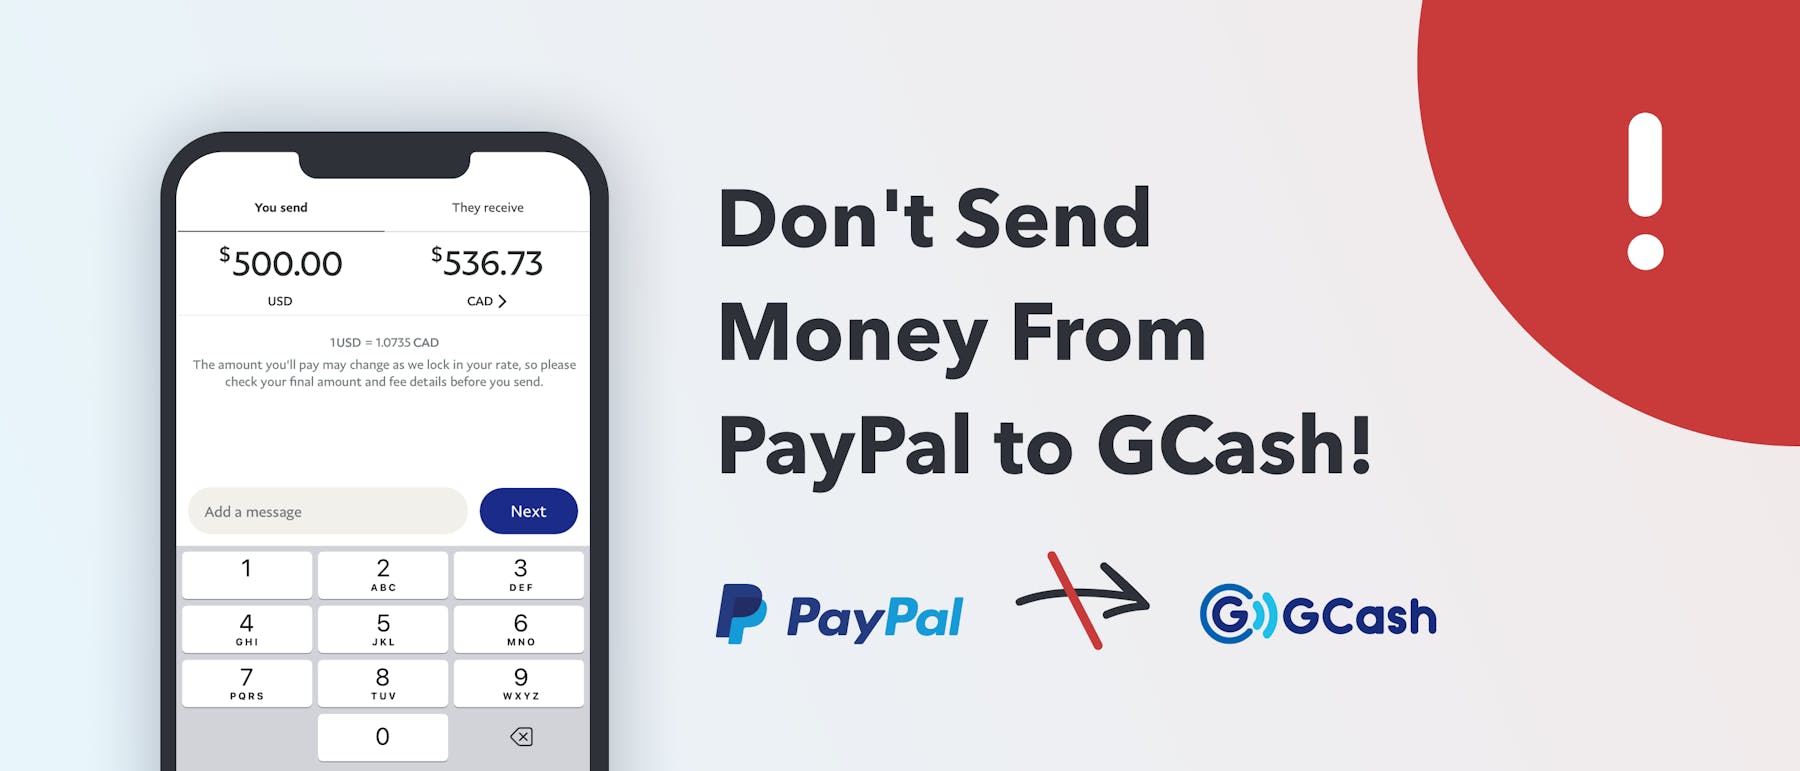 How to transfer money from PayPal to GCash